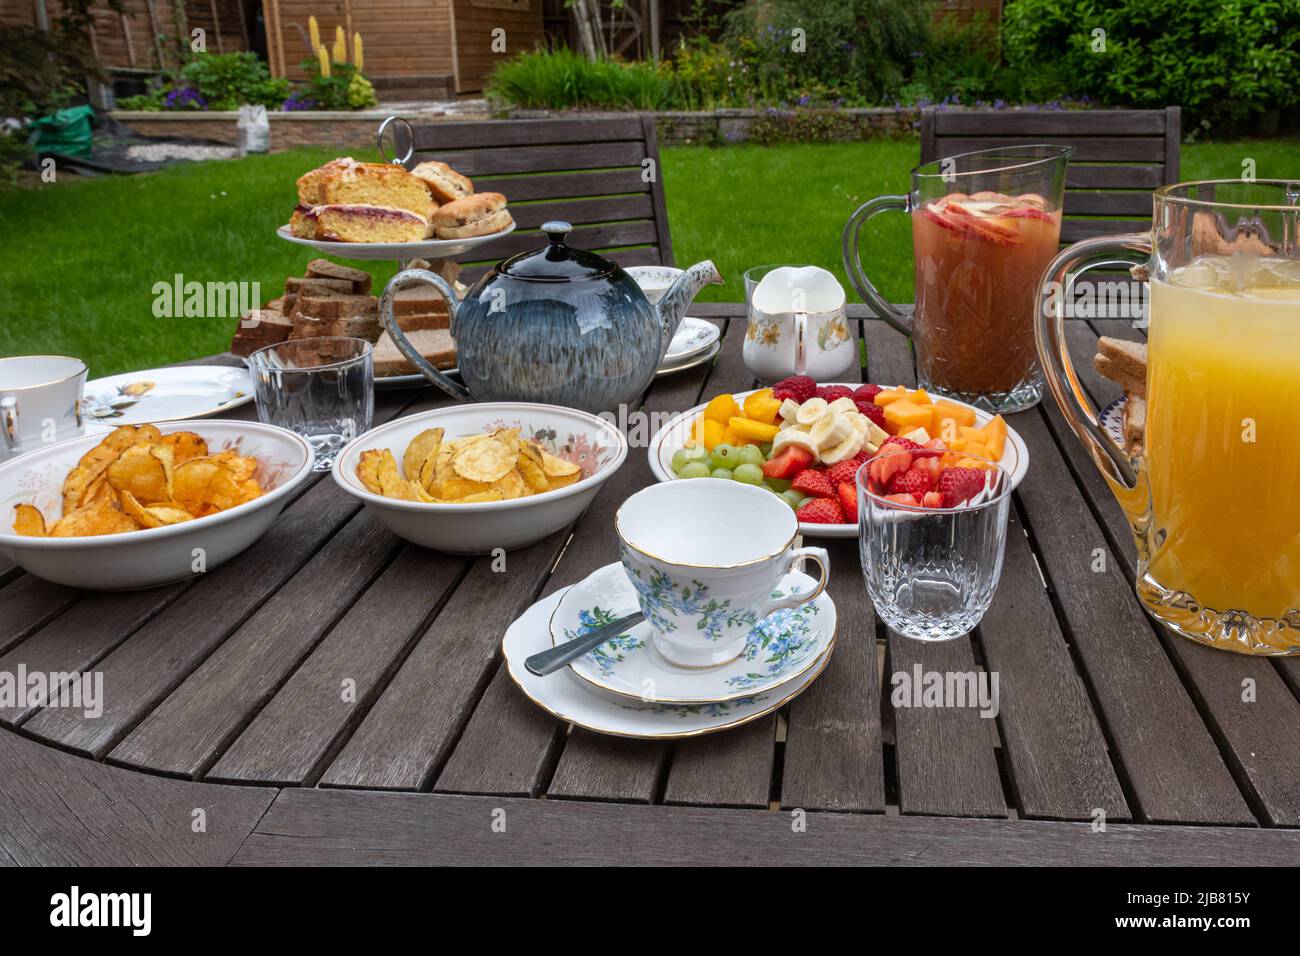 The Queen's Platinum Jubilee bank holiday - table set for a family afternoon tea in the garden with sandwiches, cakes, tea, juice and fruit, June 2022 Stock Photo